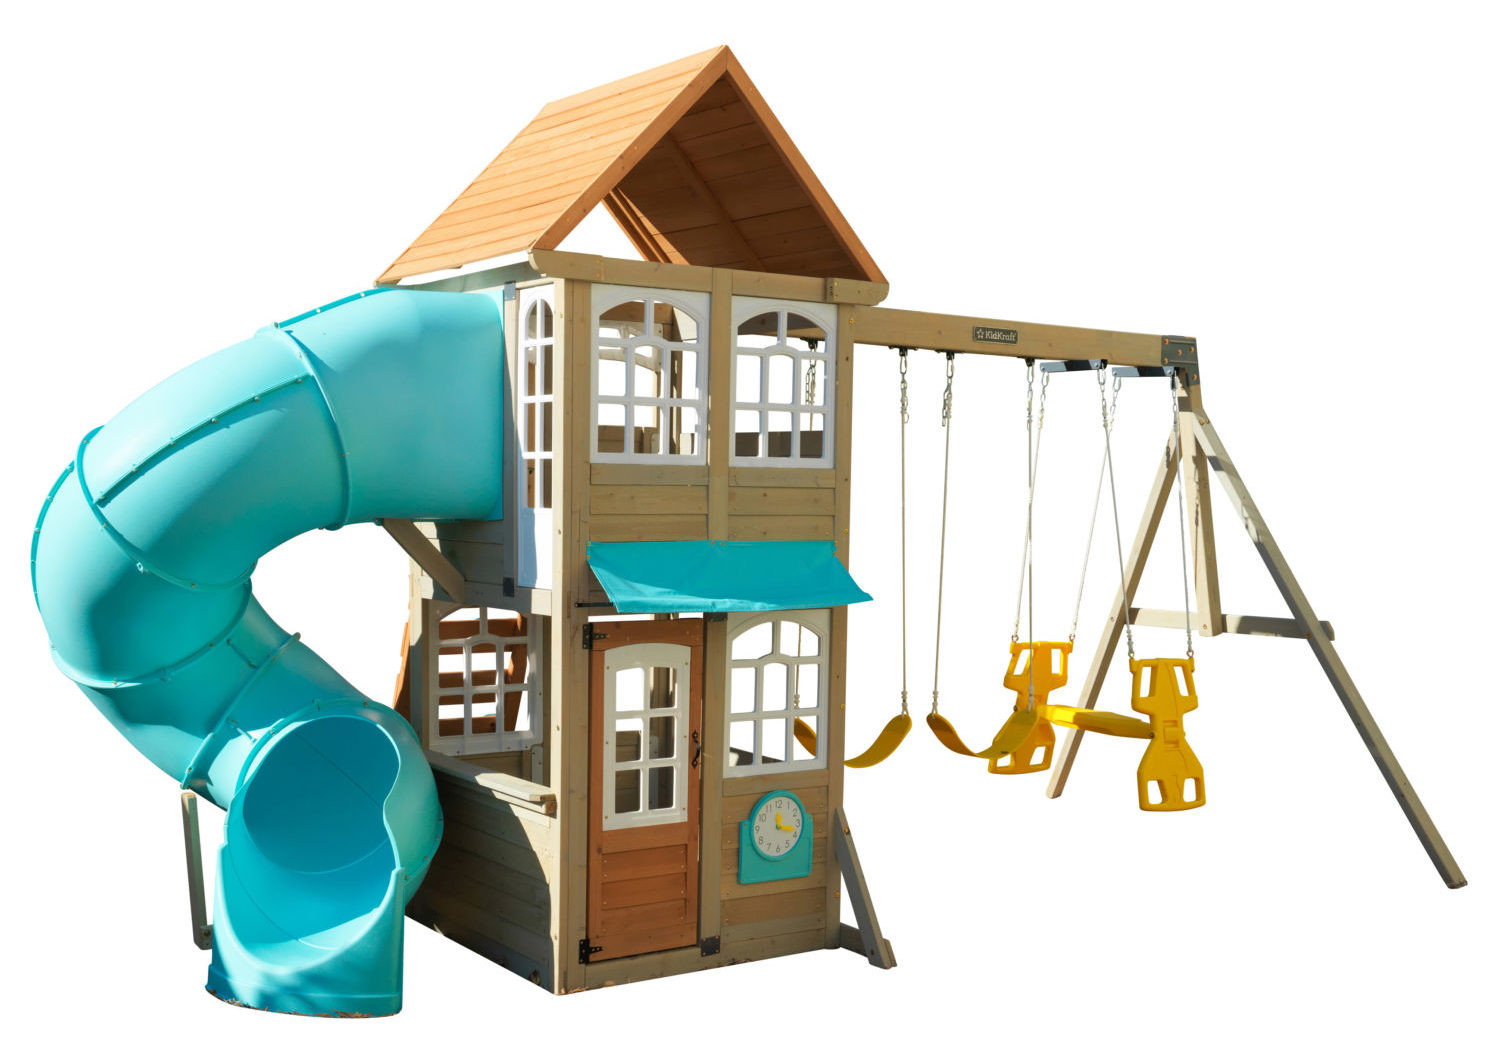 These Outdoor Playsets Give Kids The, Wooden Outdoor Playsets